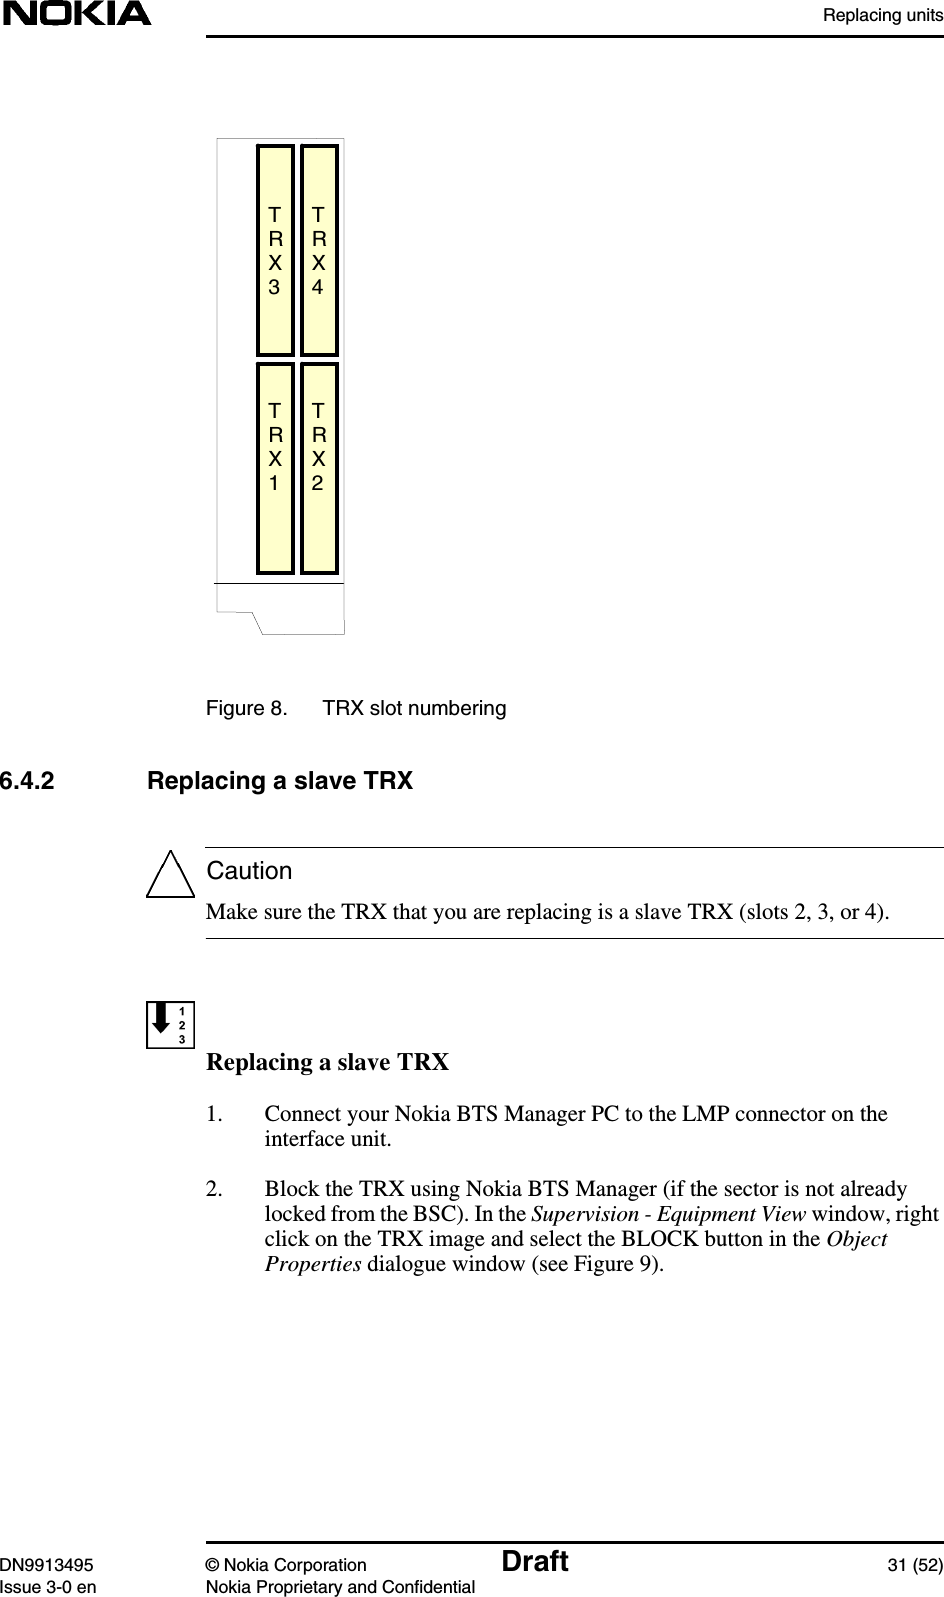 Replacing unitsDN9913495 © Nokia Corporation Draft 31 (52)Issue 3-0 en Nokia Proprietary and ConfidentialCautionFigure 8. TRX slot numbering6.4.2 Replacing a slave TRXMake sure the TRX that you are replacing is a slave TRX (slots 2, 3, or 4).Replacing a slave TRX1. Connect your Nokia BTS Manager PC to the LMP connector on theinterface unit.2. Block the TRX using Nokia BTS Manager (if the sector is not alreadylocked from the BSC). In the Supervision - Equipment View window, rightclick on the TRX image and select the BLOCK button in the ObjectProperties dialogue window (see Figure 9).TRX3TRX4TRX1TRX2